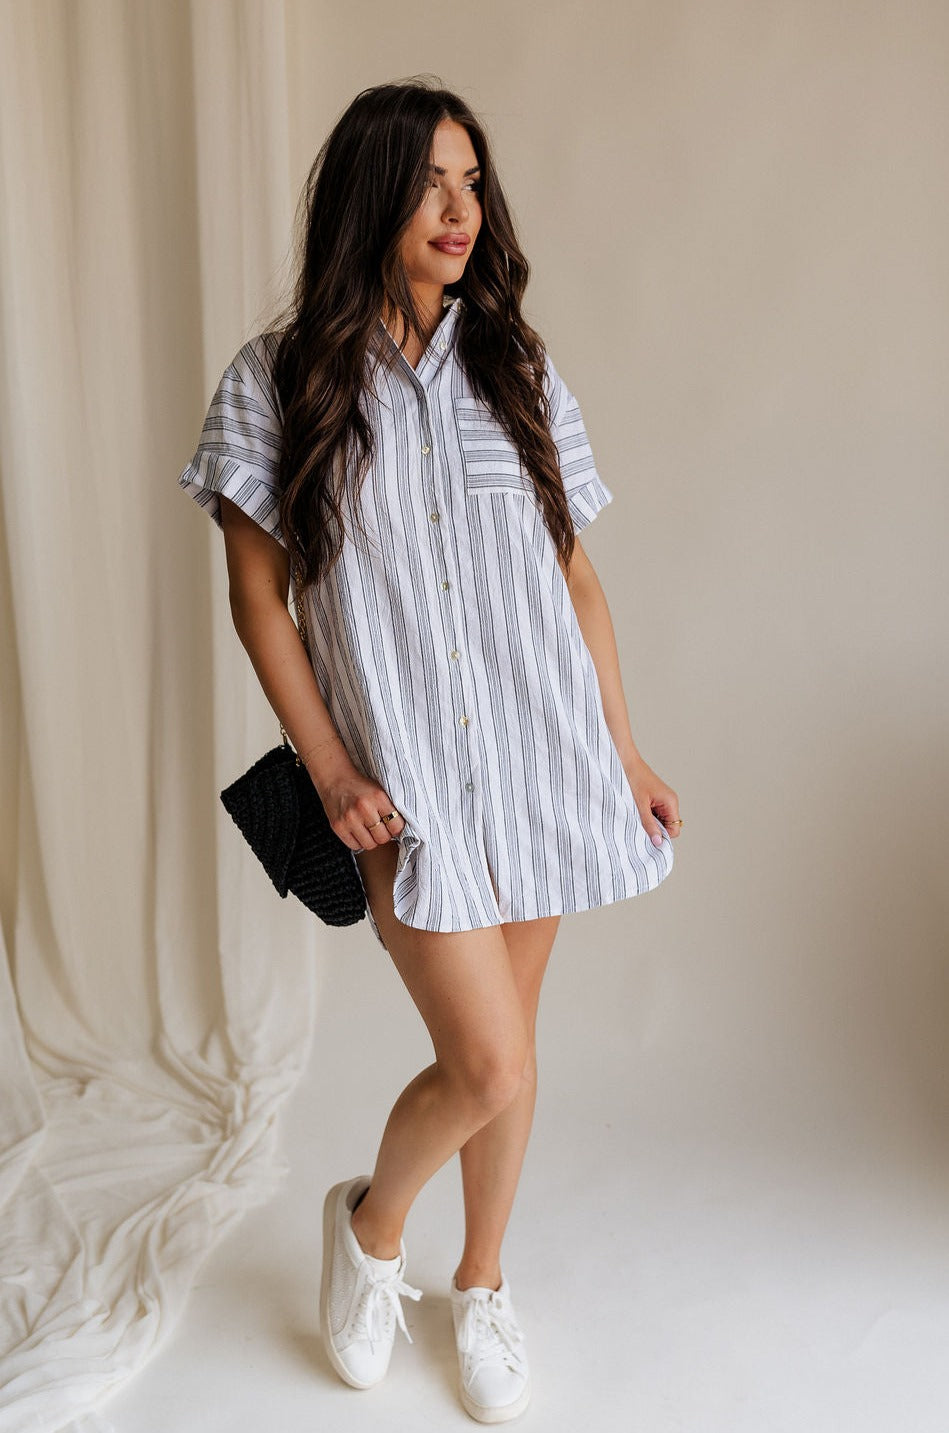 Full body front view of female model wearing the Jenna White & Black Striped Mini Dress that has white fabric with vertical black stripes, a front pocket, button up front, short sleeves, and collar.